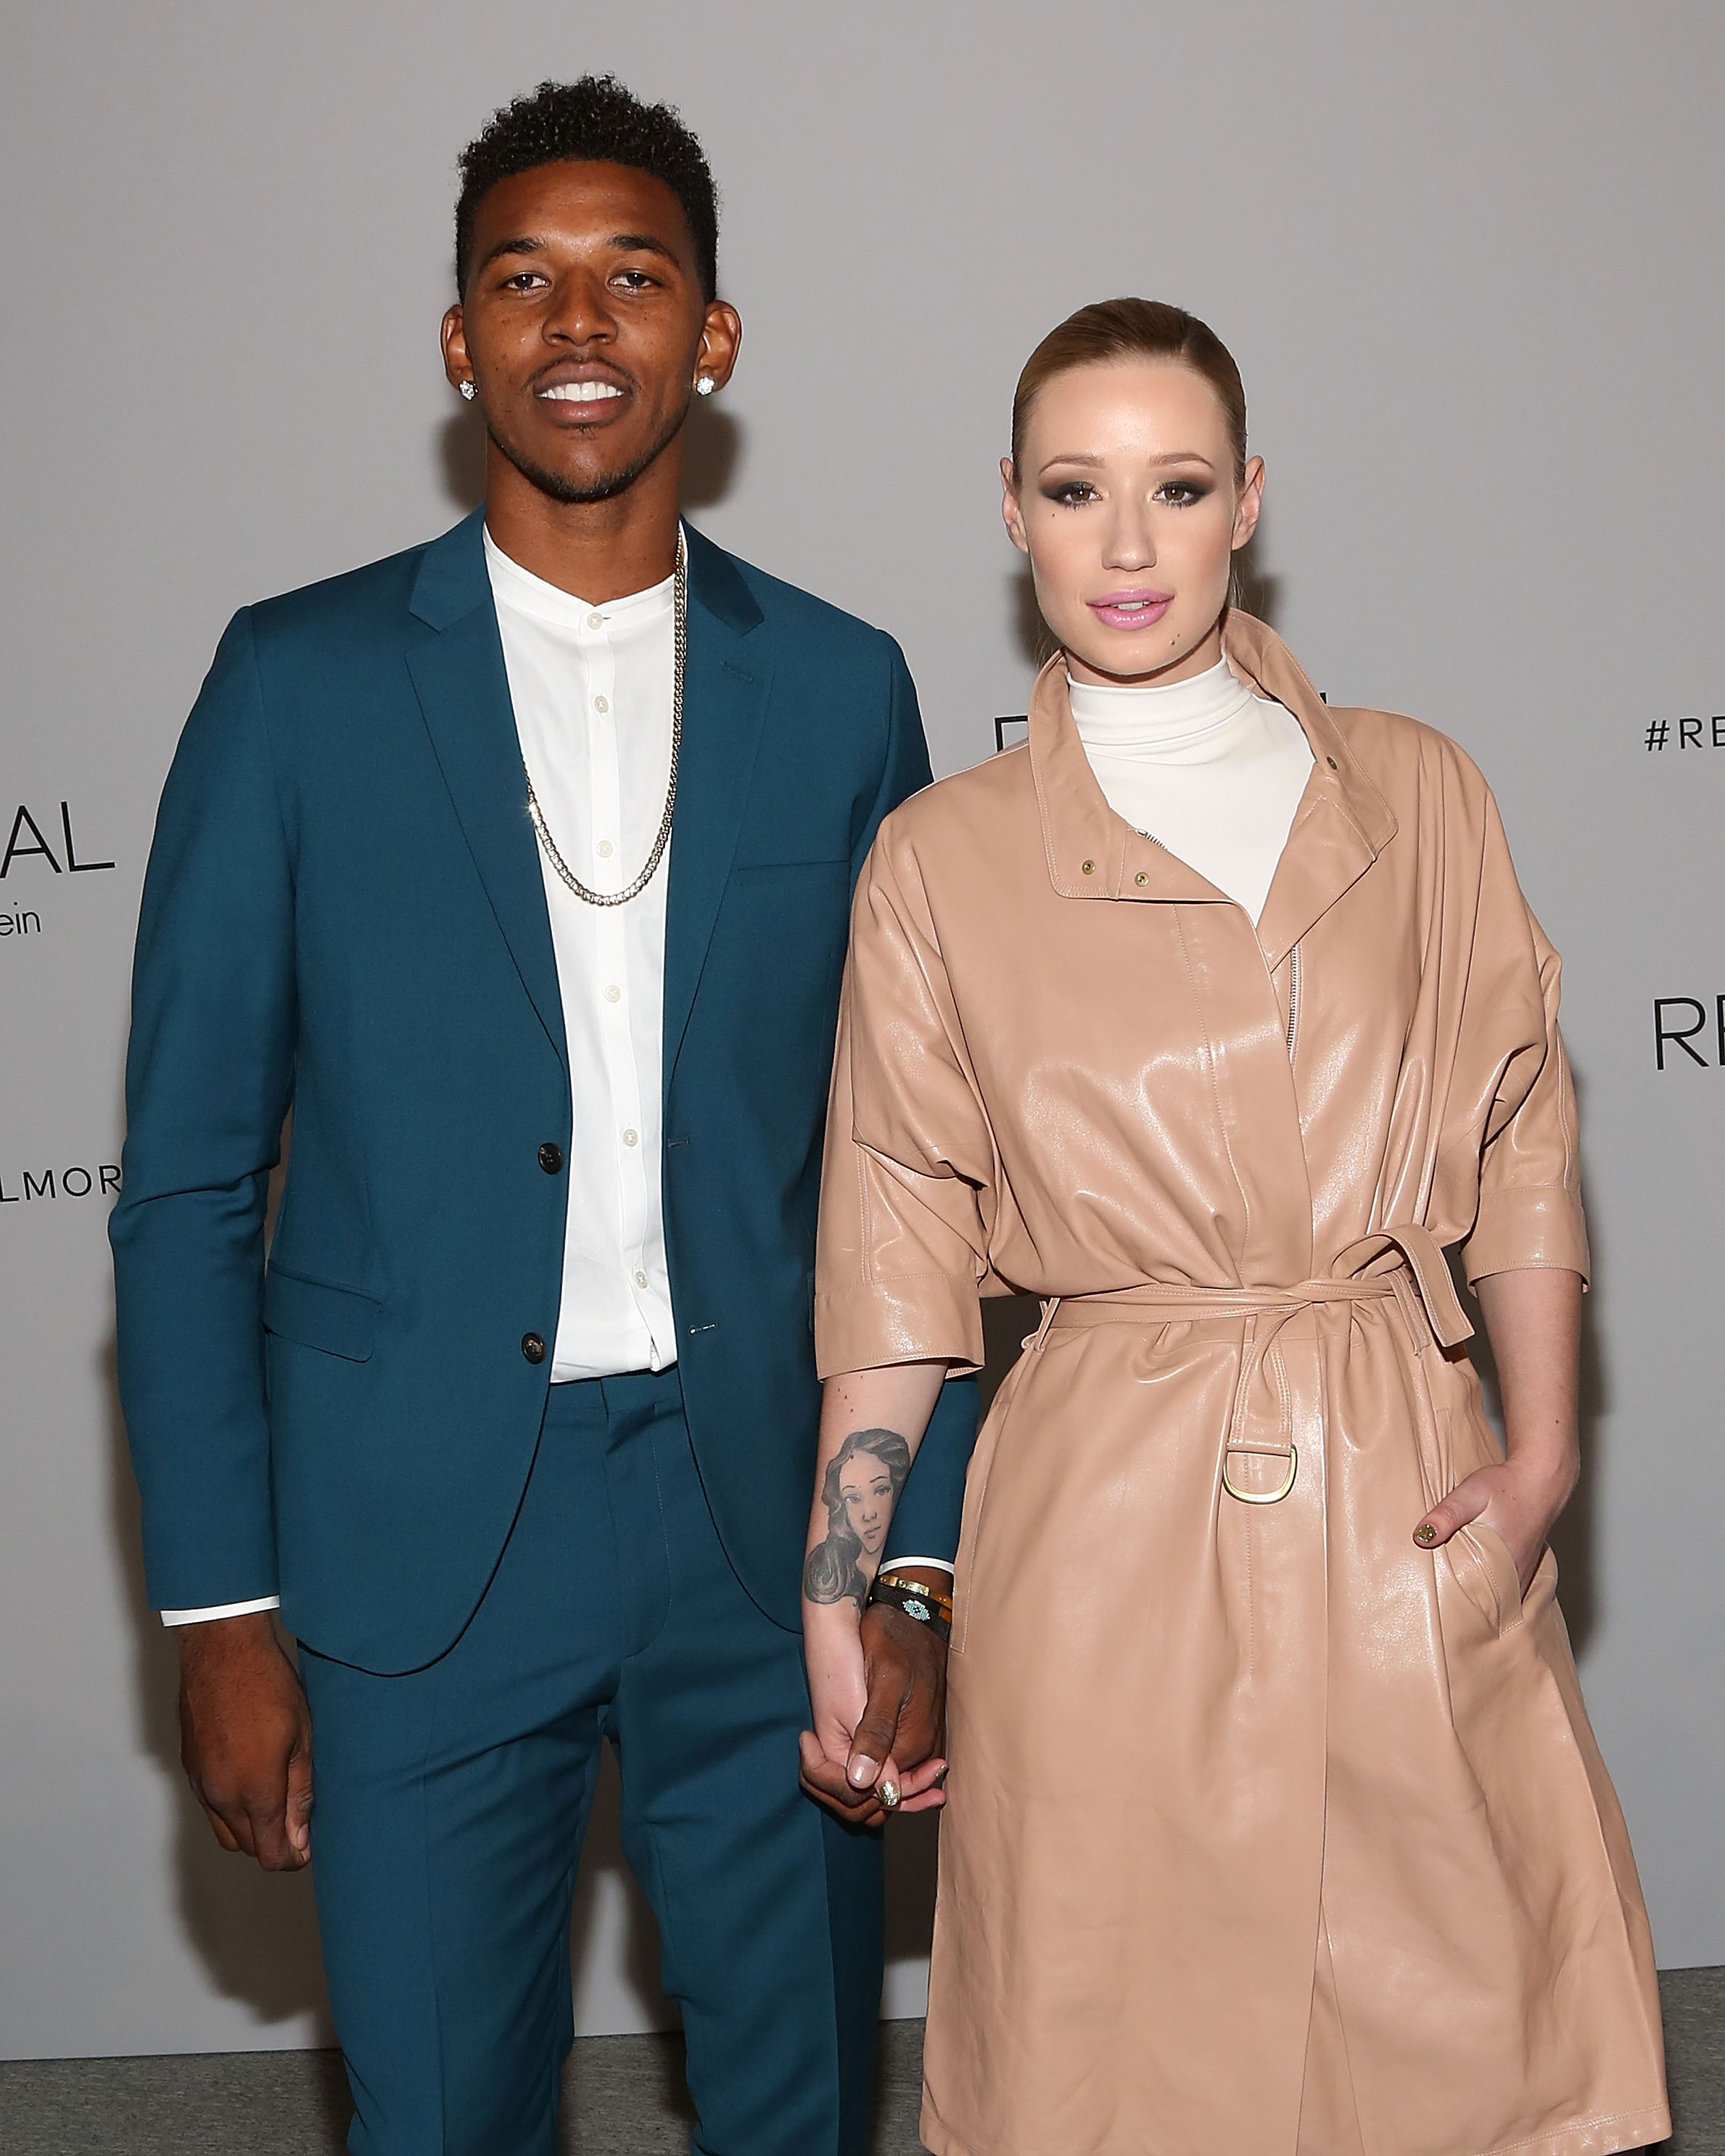 Nick Young and Iggy Azalea at the REVEAL Calvin Klein Fragrance Launch Party on September 8, 2014, in New York City. | Source: Getty Images